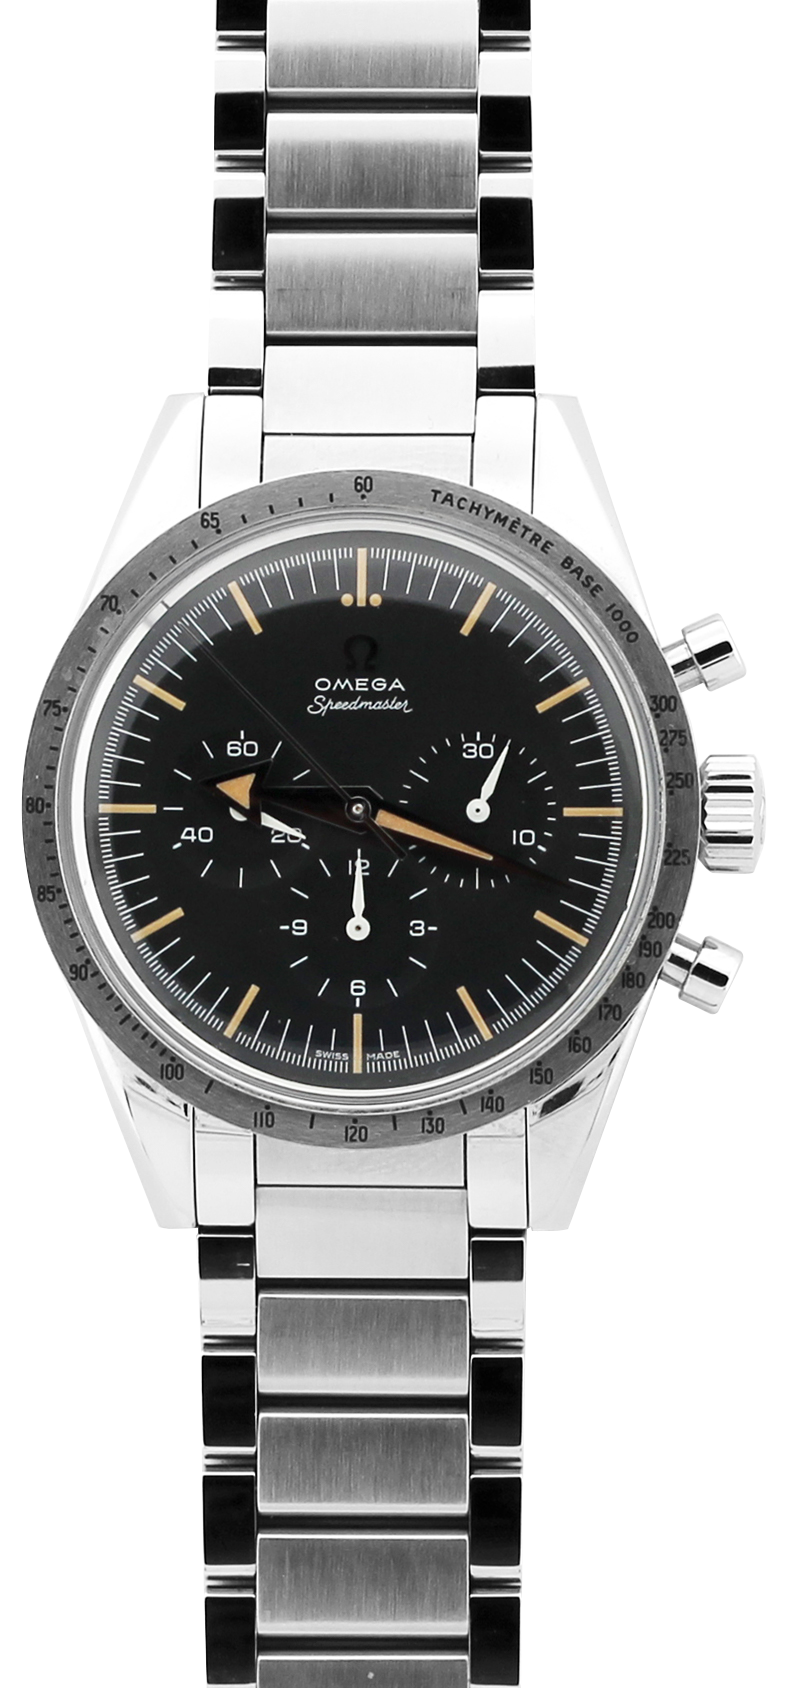 Omega 1957 60th Limited Anniversary Speedmaster Professional Chronograph with Bracelet, Strap, Box & Booklets